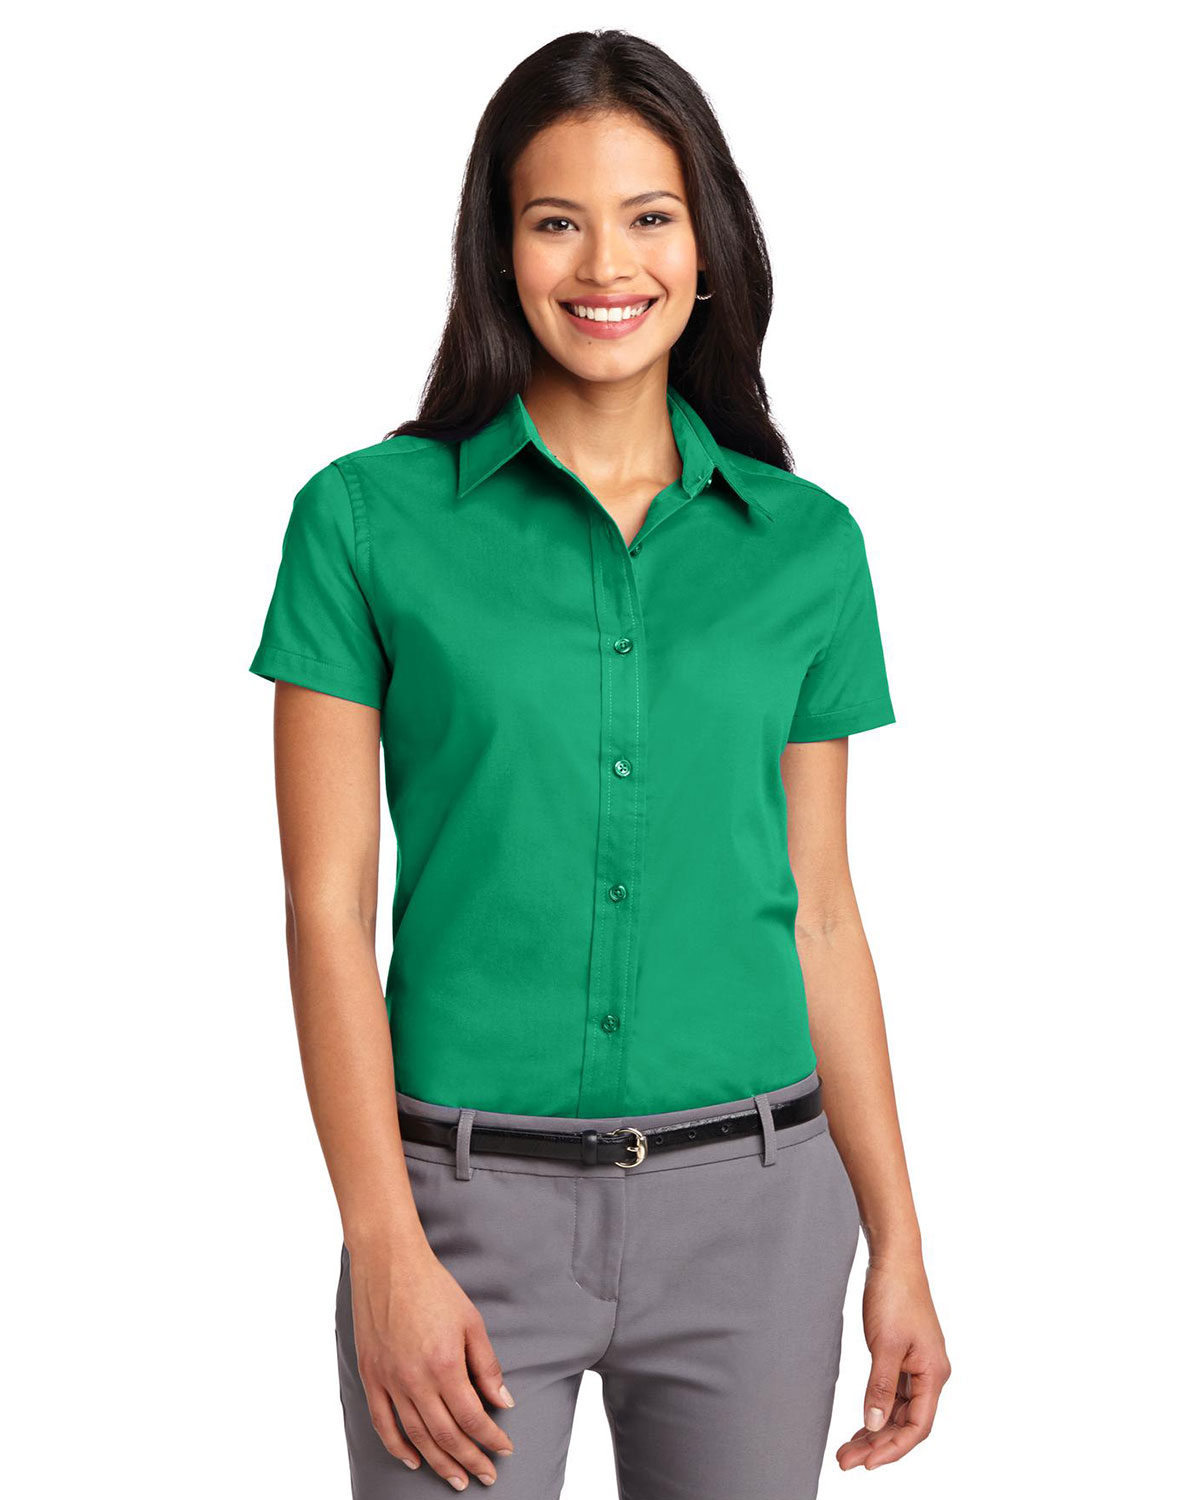 Port Authority L508 Women Short-Sleeve Easy Care Shirt at Apparelstation